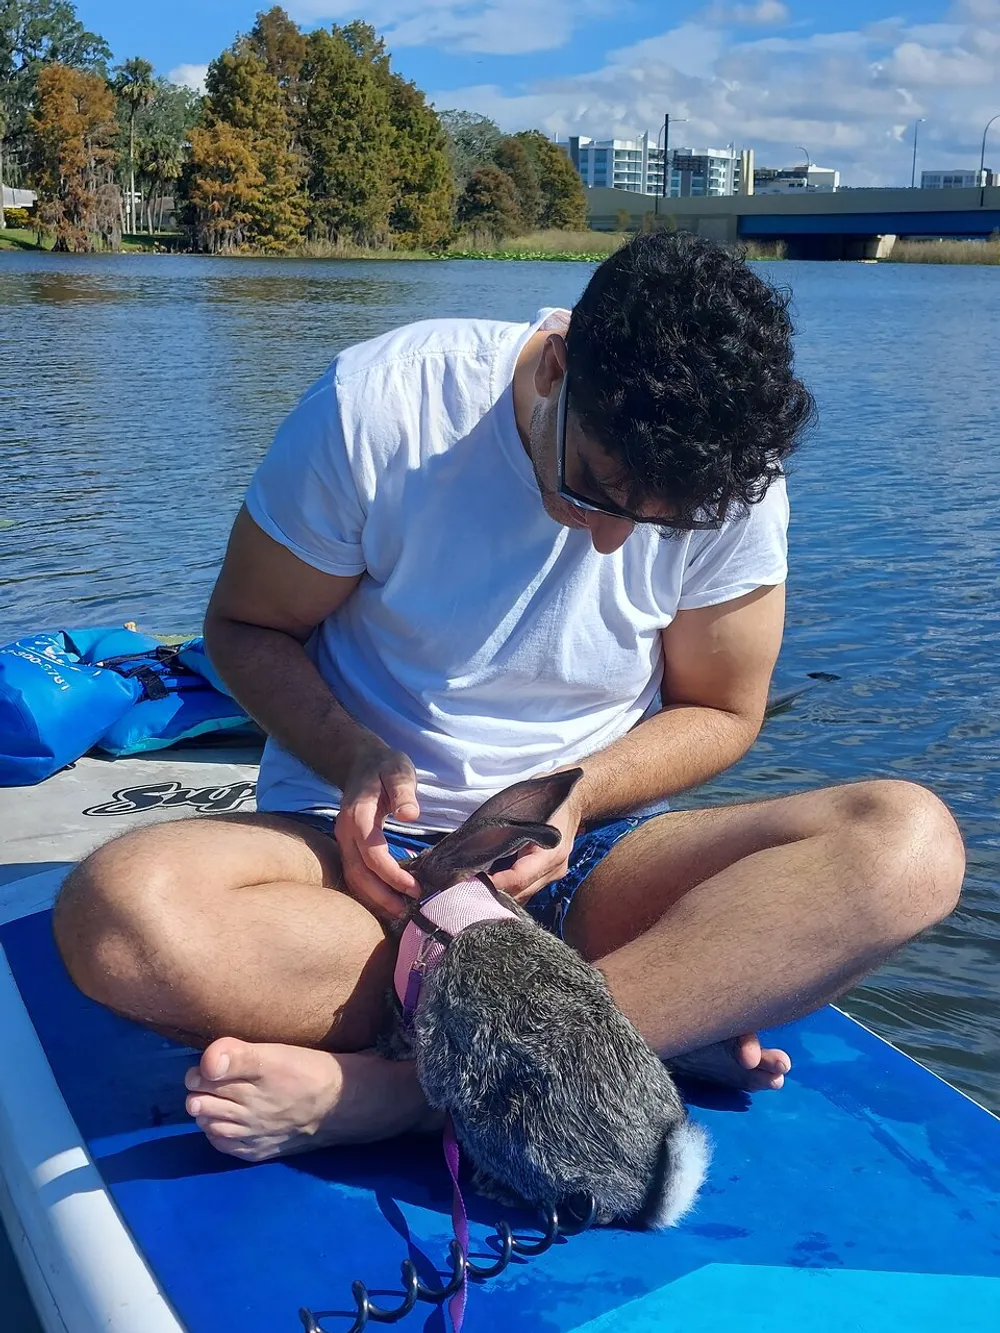 A person is sitting cross-legged on a paddleboard looking at a mobile phone with a pet wearing a pink harness possibly a small dog on a body of water on a sunny day